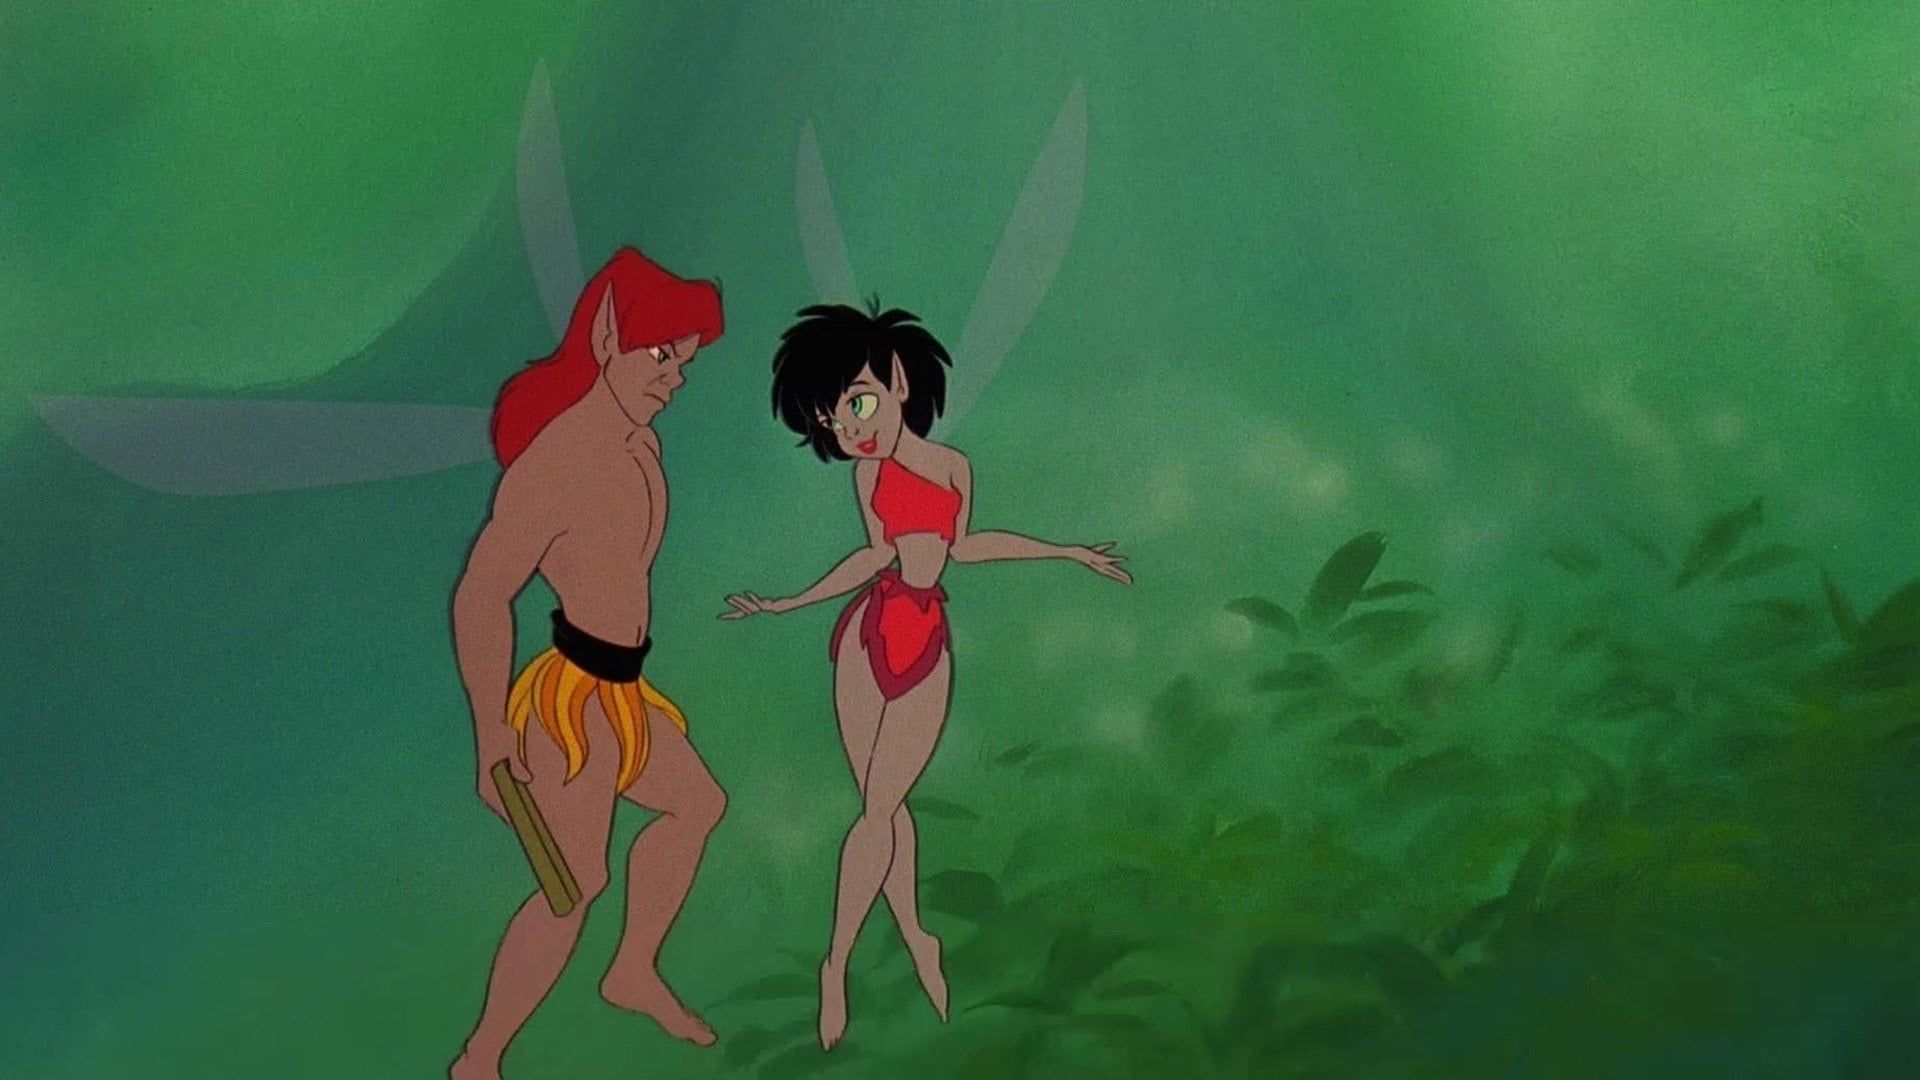 FernGully 2: The Magical Rescue background